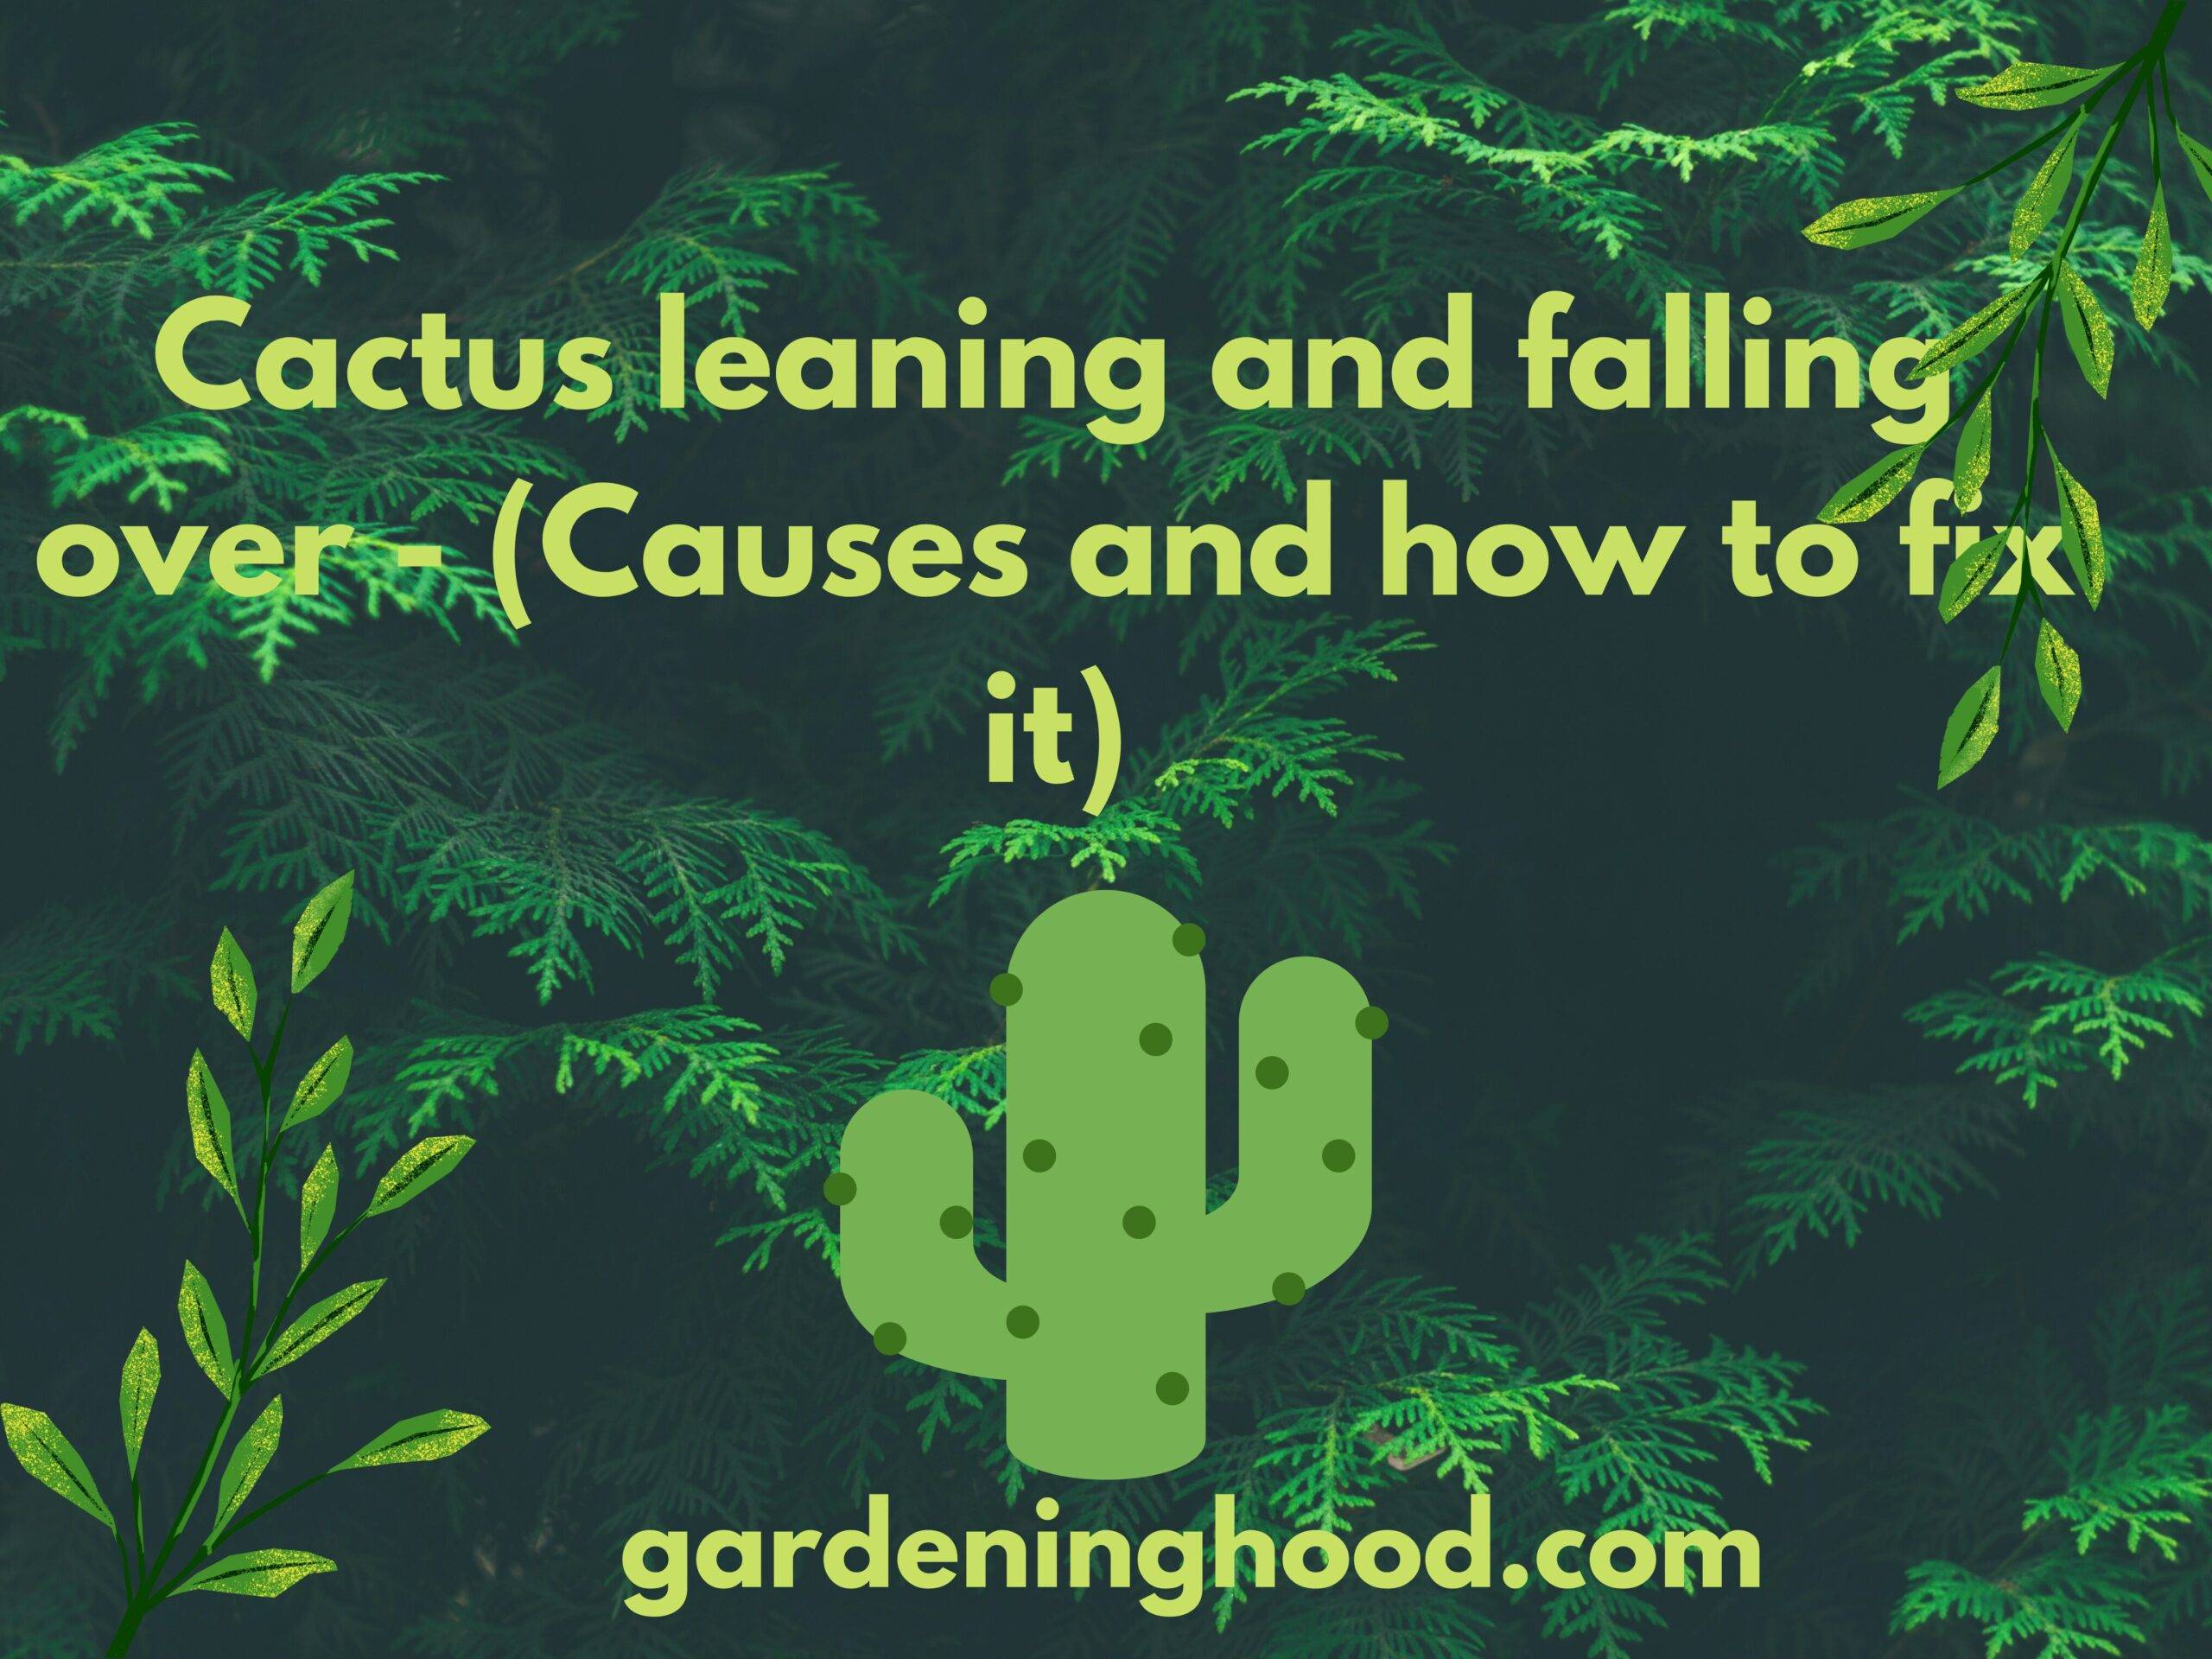 Cactus leaning and falling over - (Causes and how to fix it)